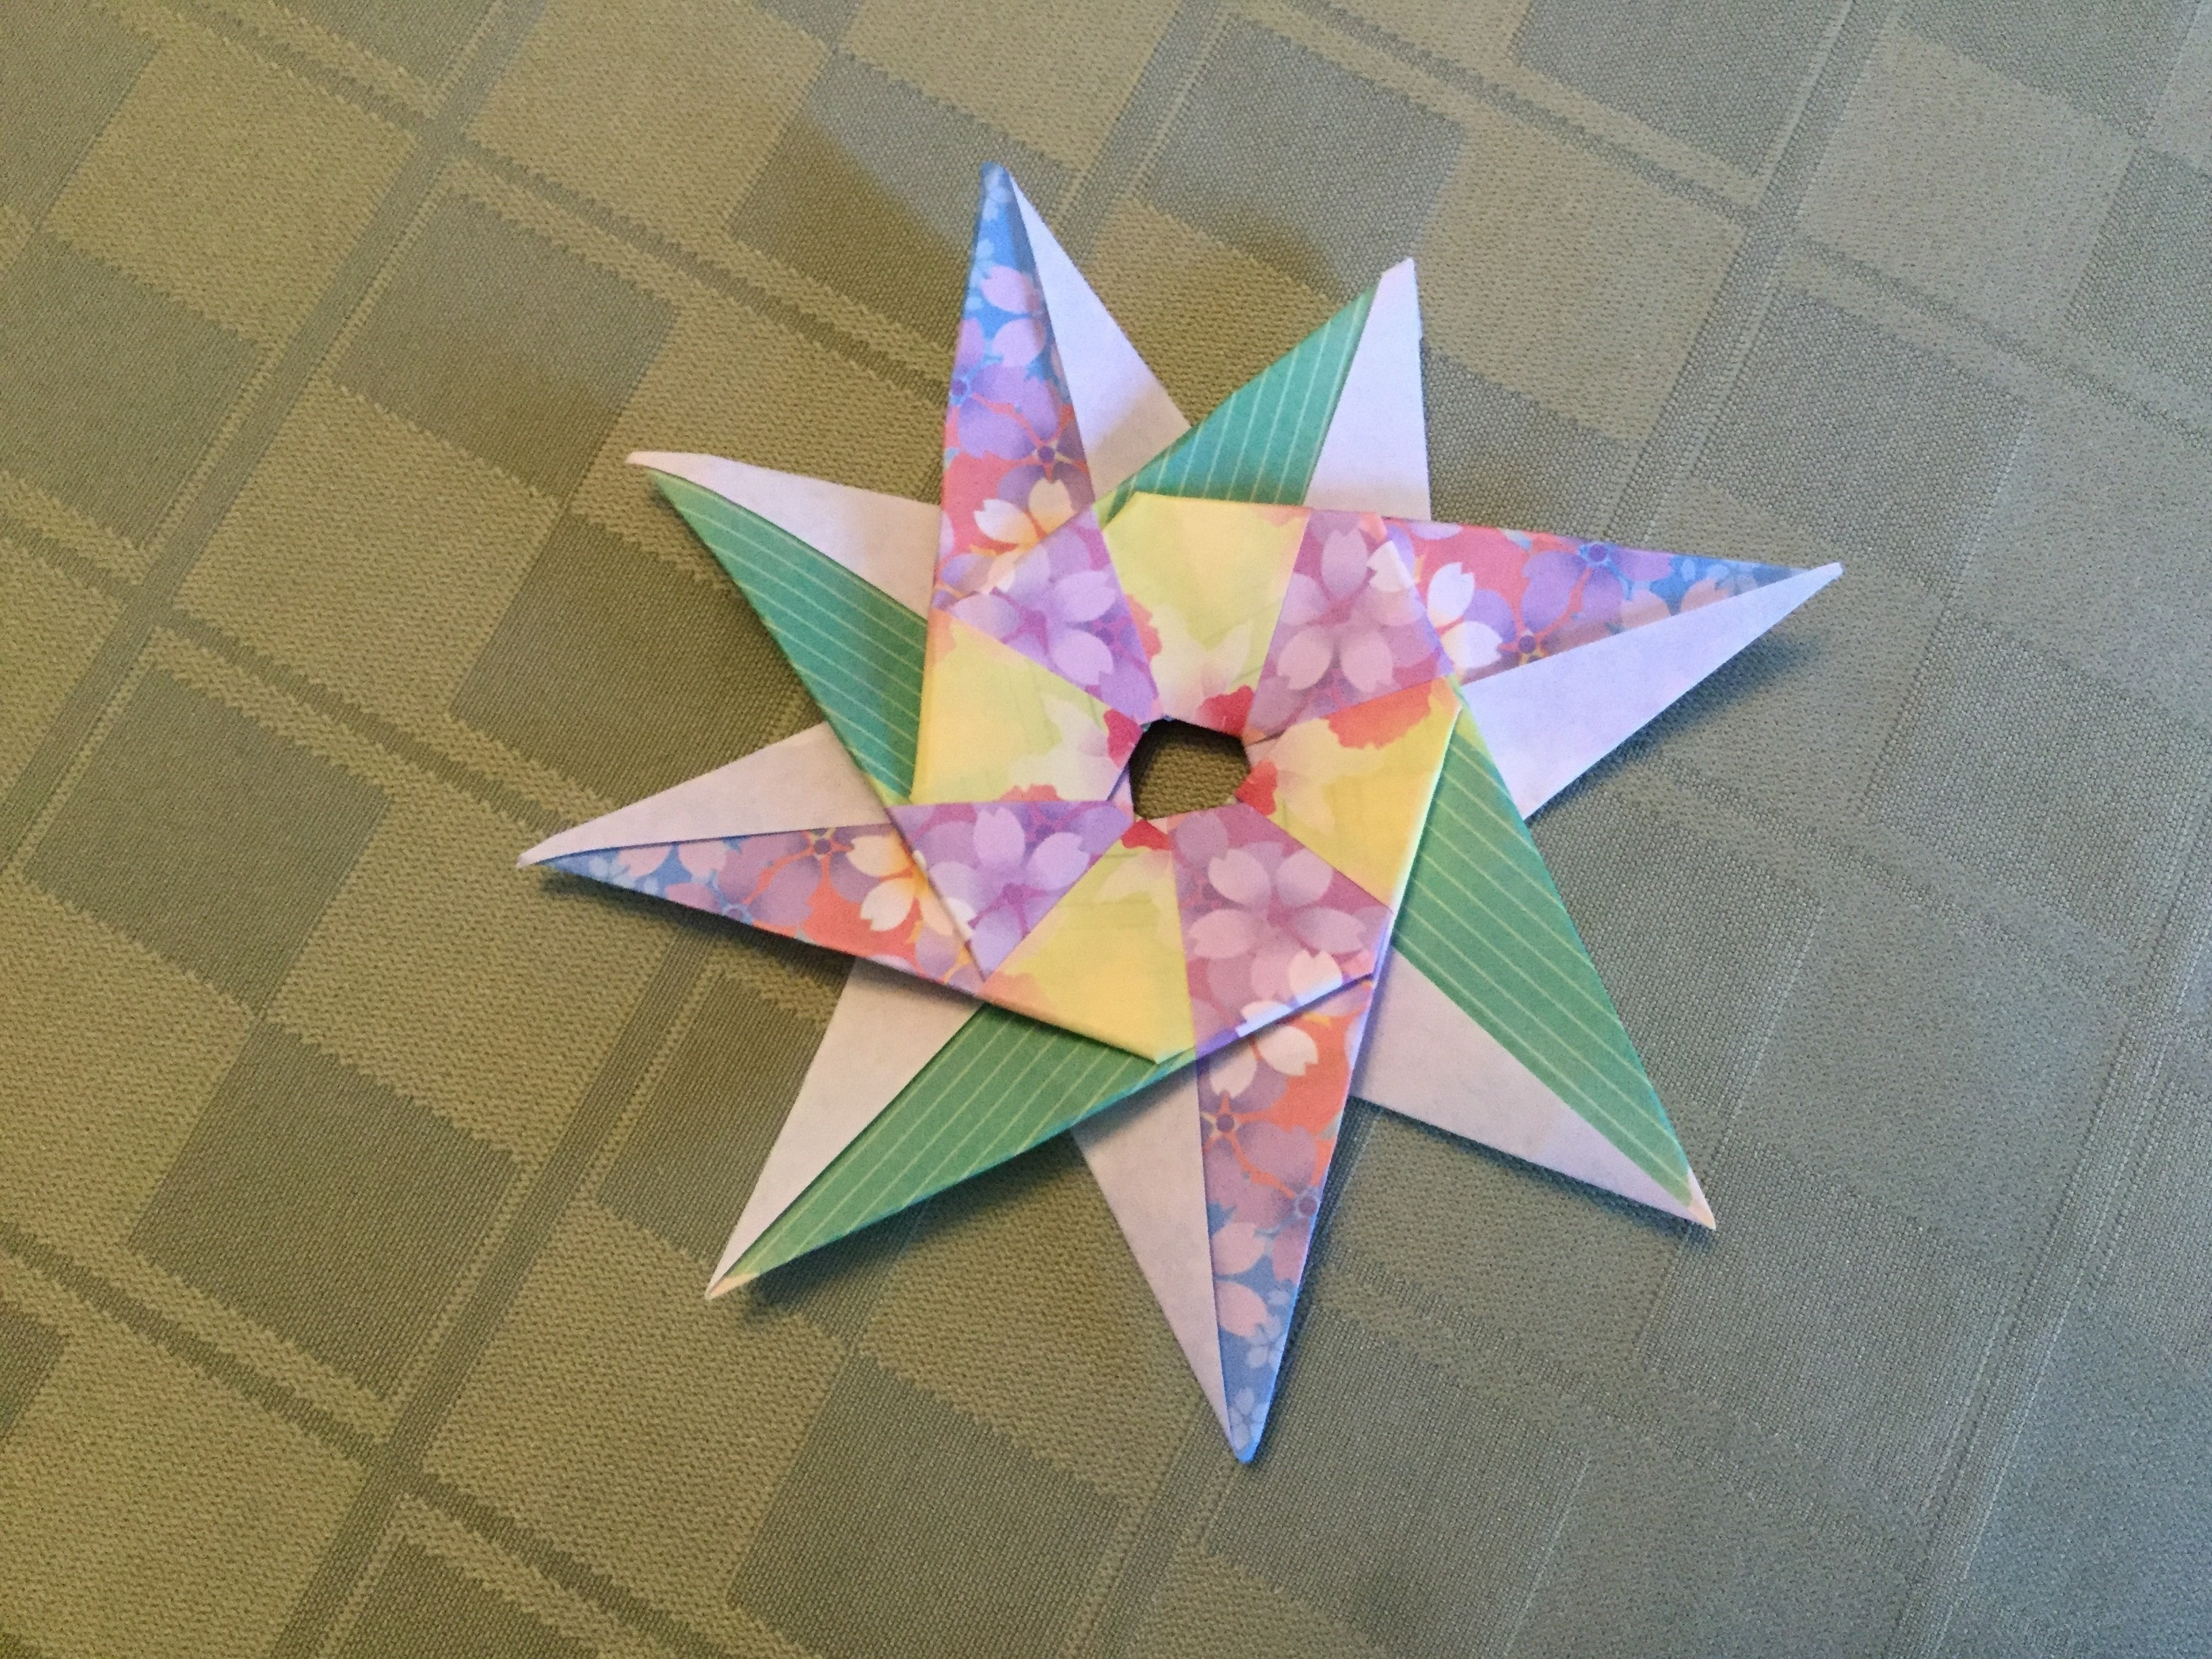 Origami Modular Star Origami Compass Star How To Fold An Origami Shape Papercraft On